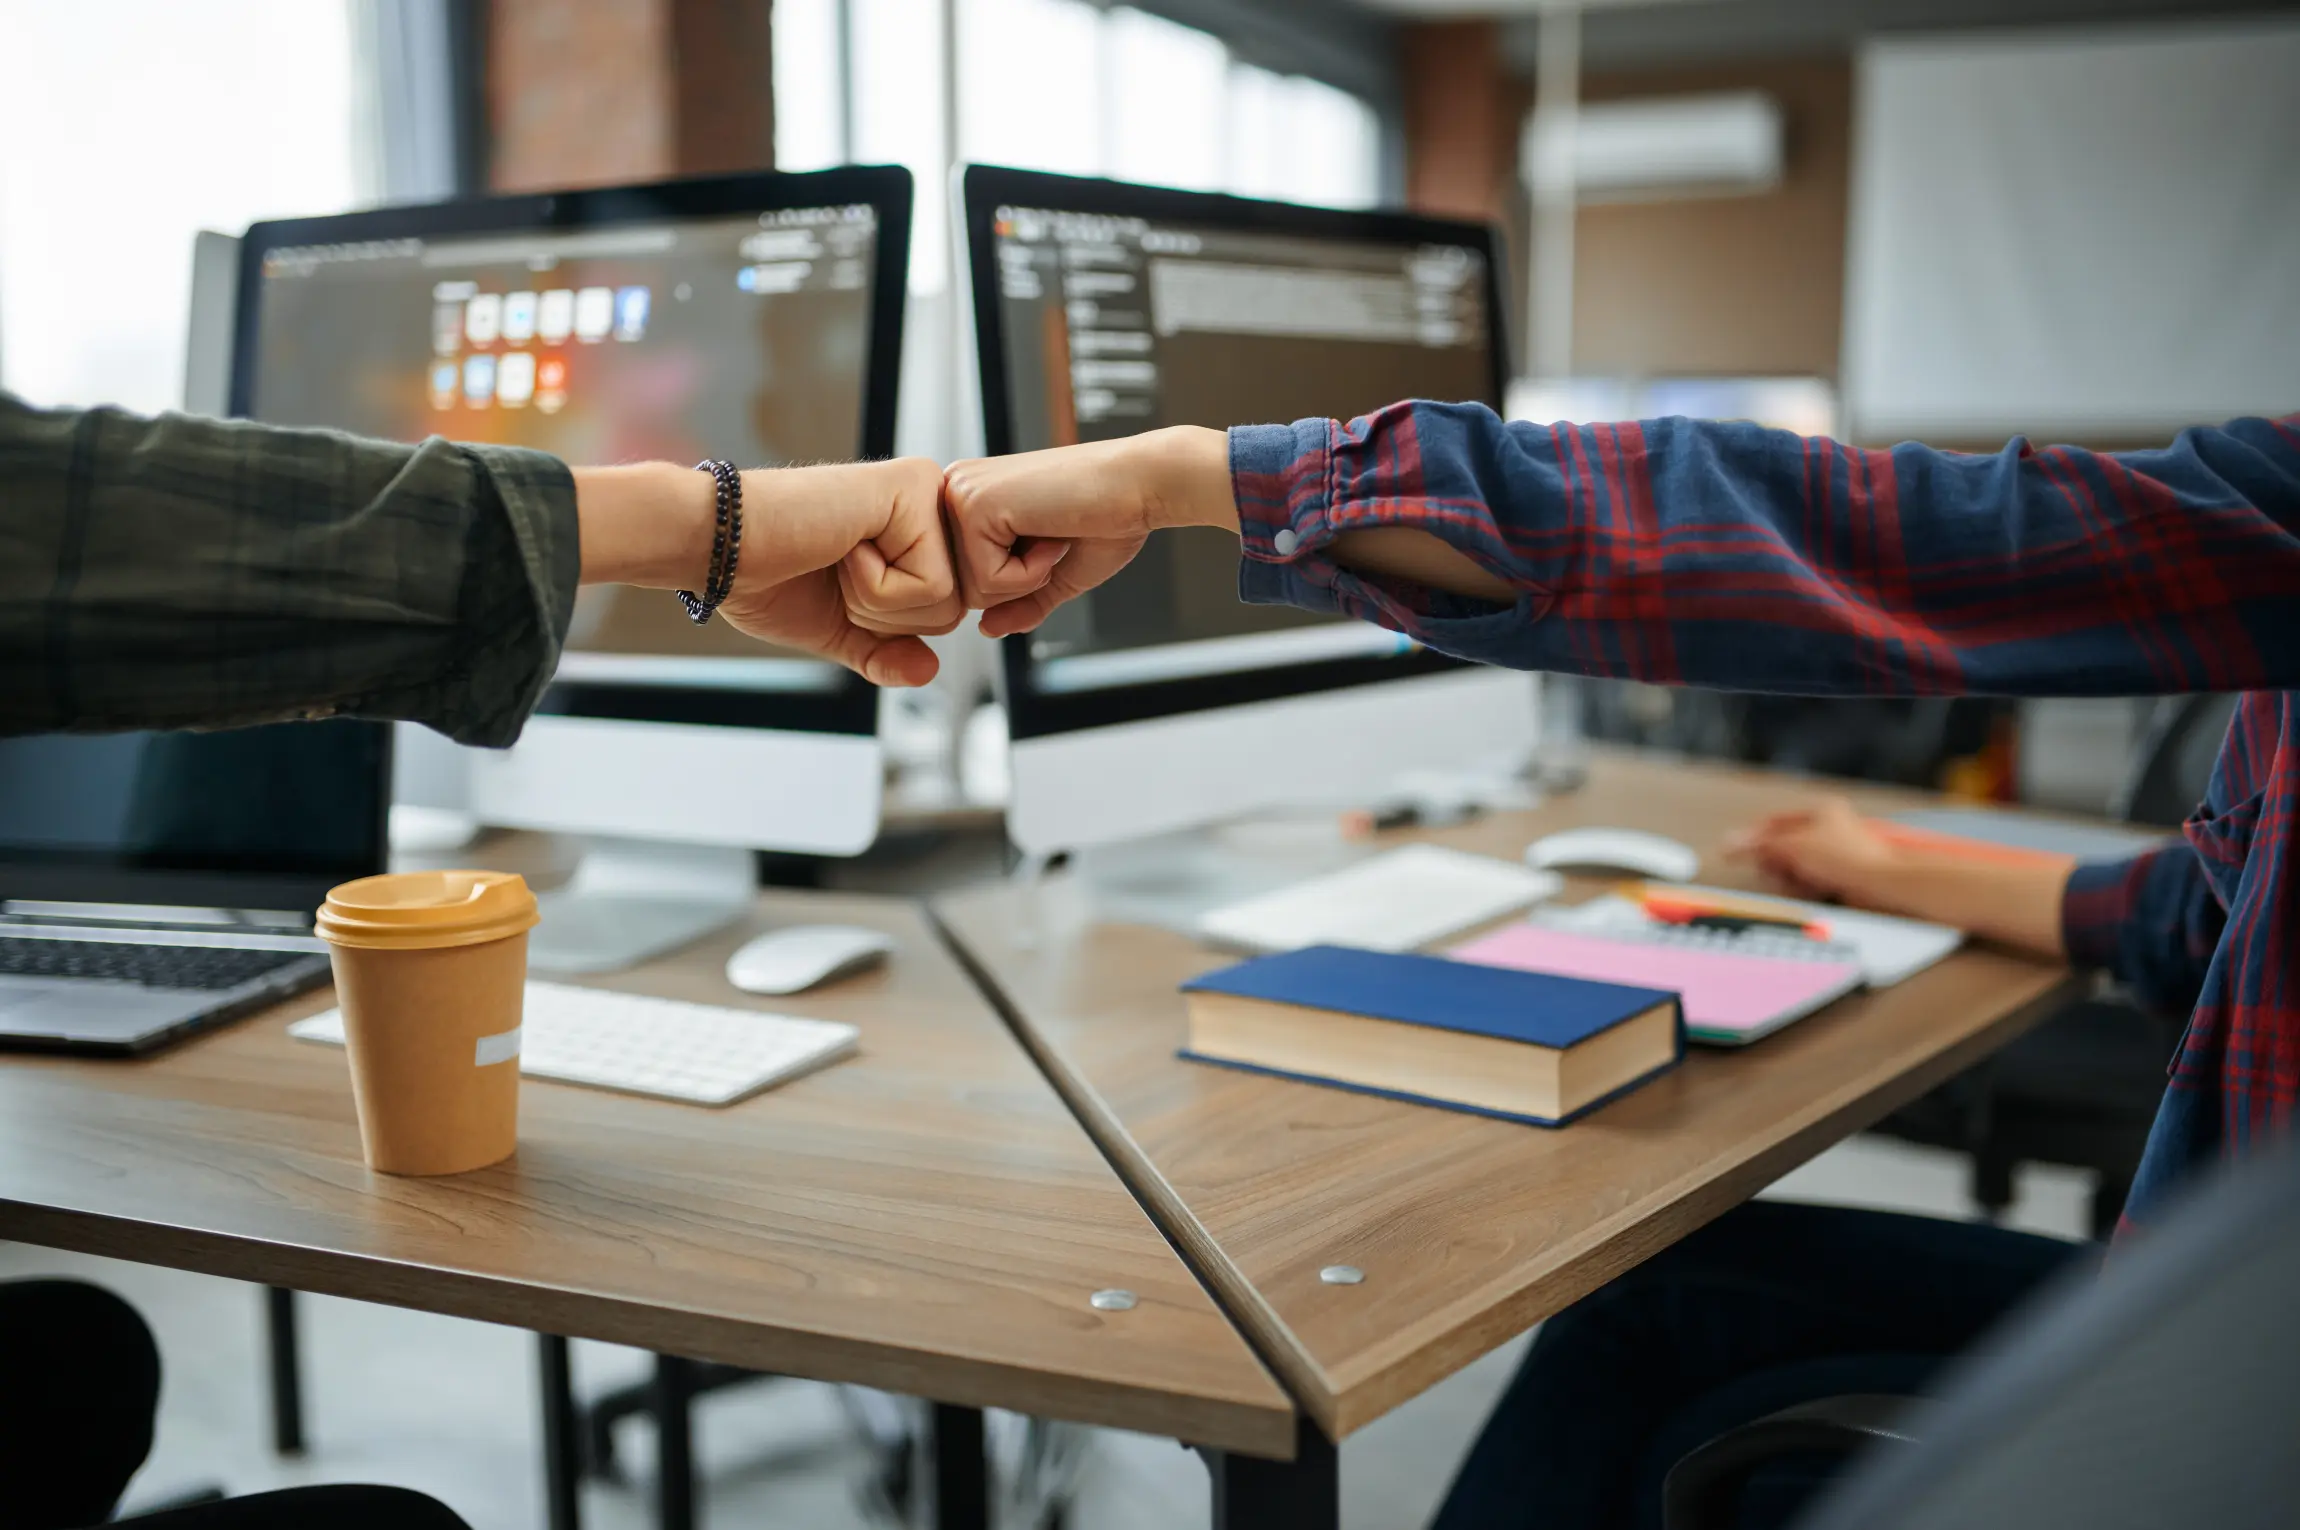 Two people give each other a fist bump at their shared desk. Their PCs can be seen in the background.